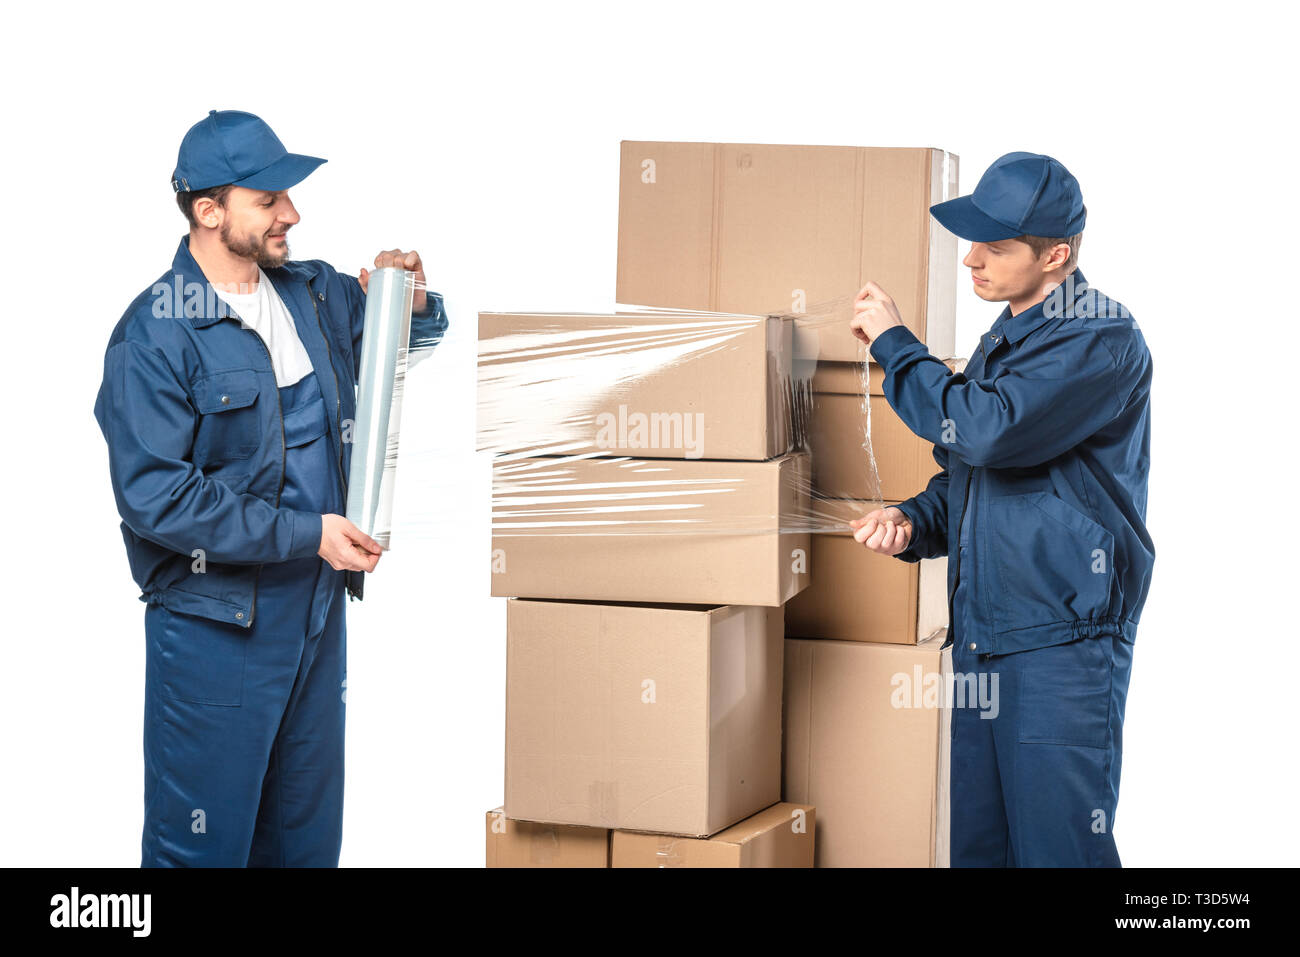 https://c8.alamy.com/comp/T3D5W4/two-movers-wrapping-cardboard-boxes-with-roll-of-stretch-film-isolated-on-white-T3D5W4.jpg